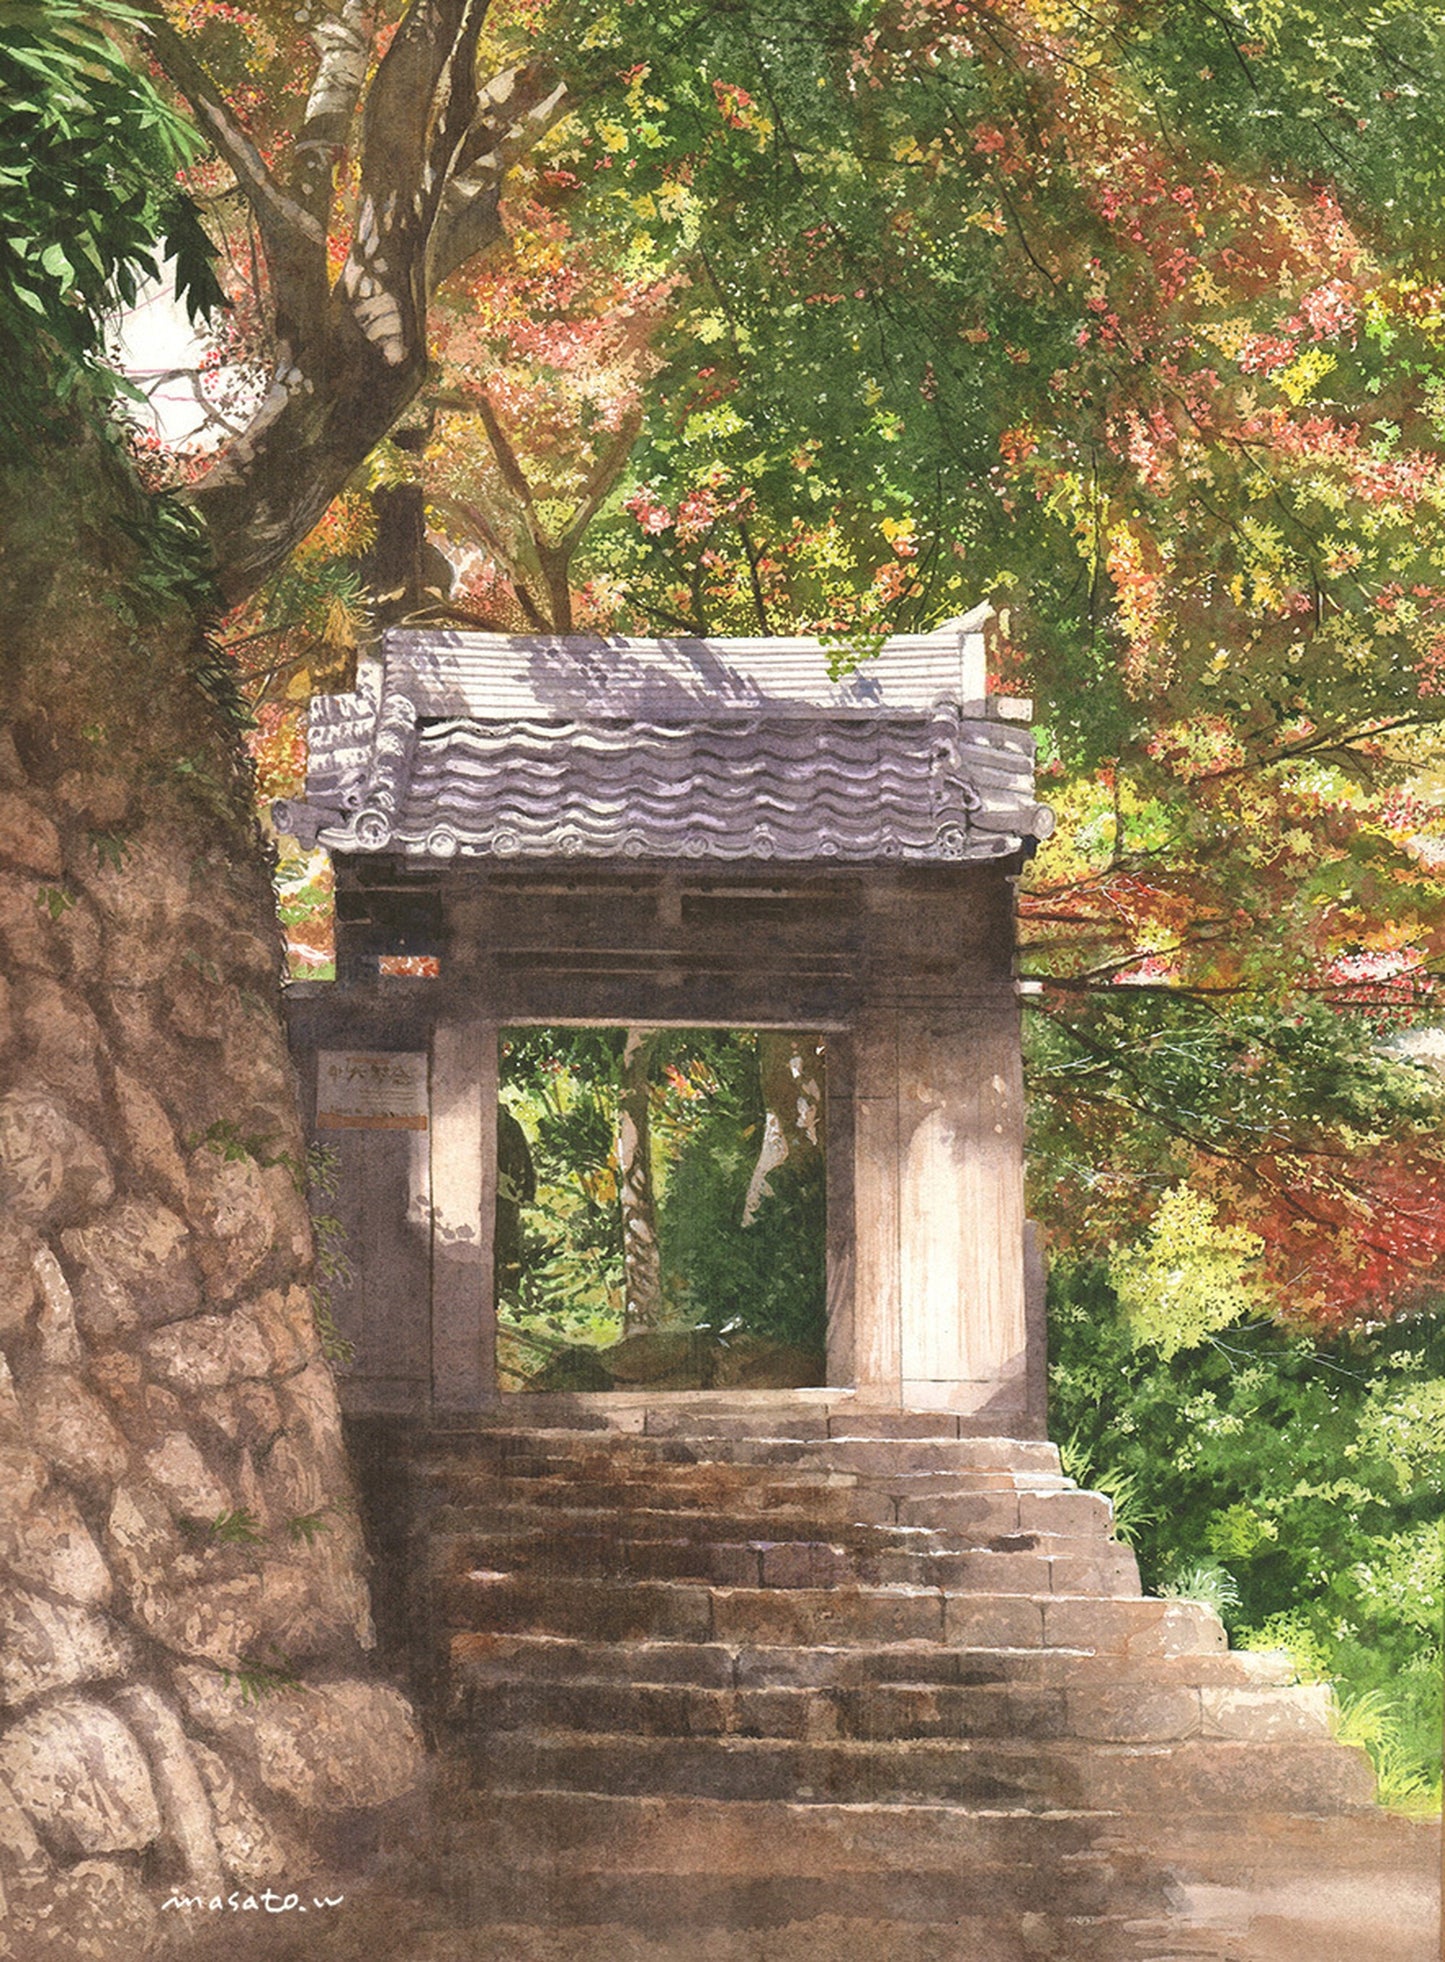 Autumn at the temple gate in Arima